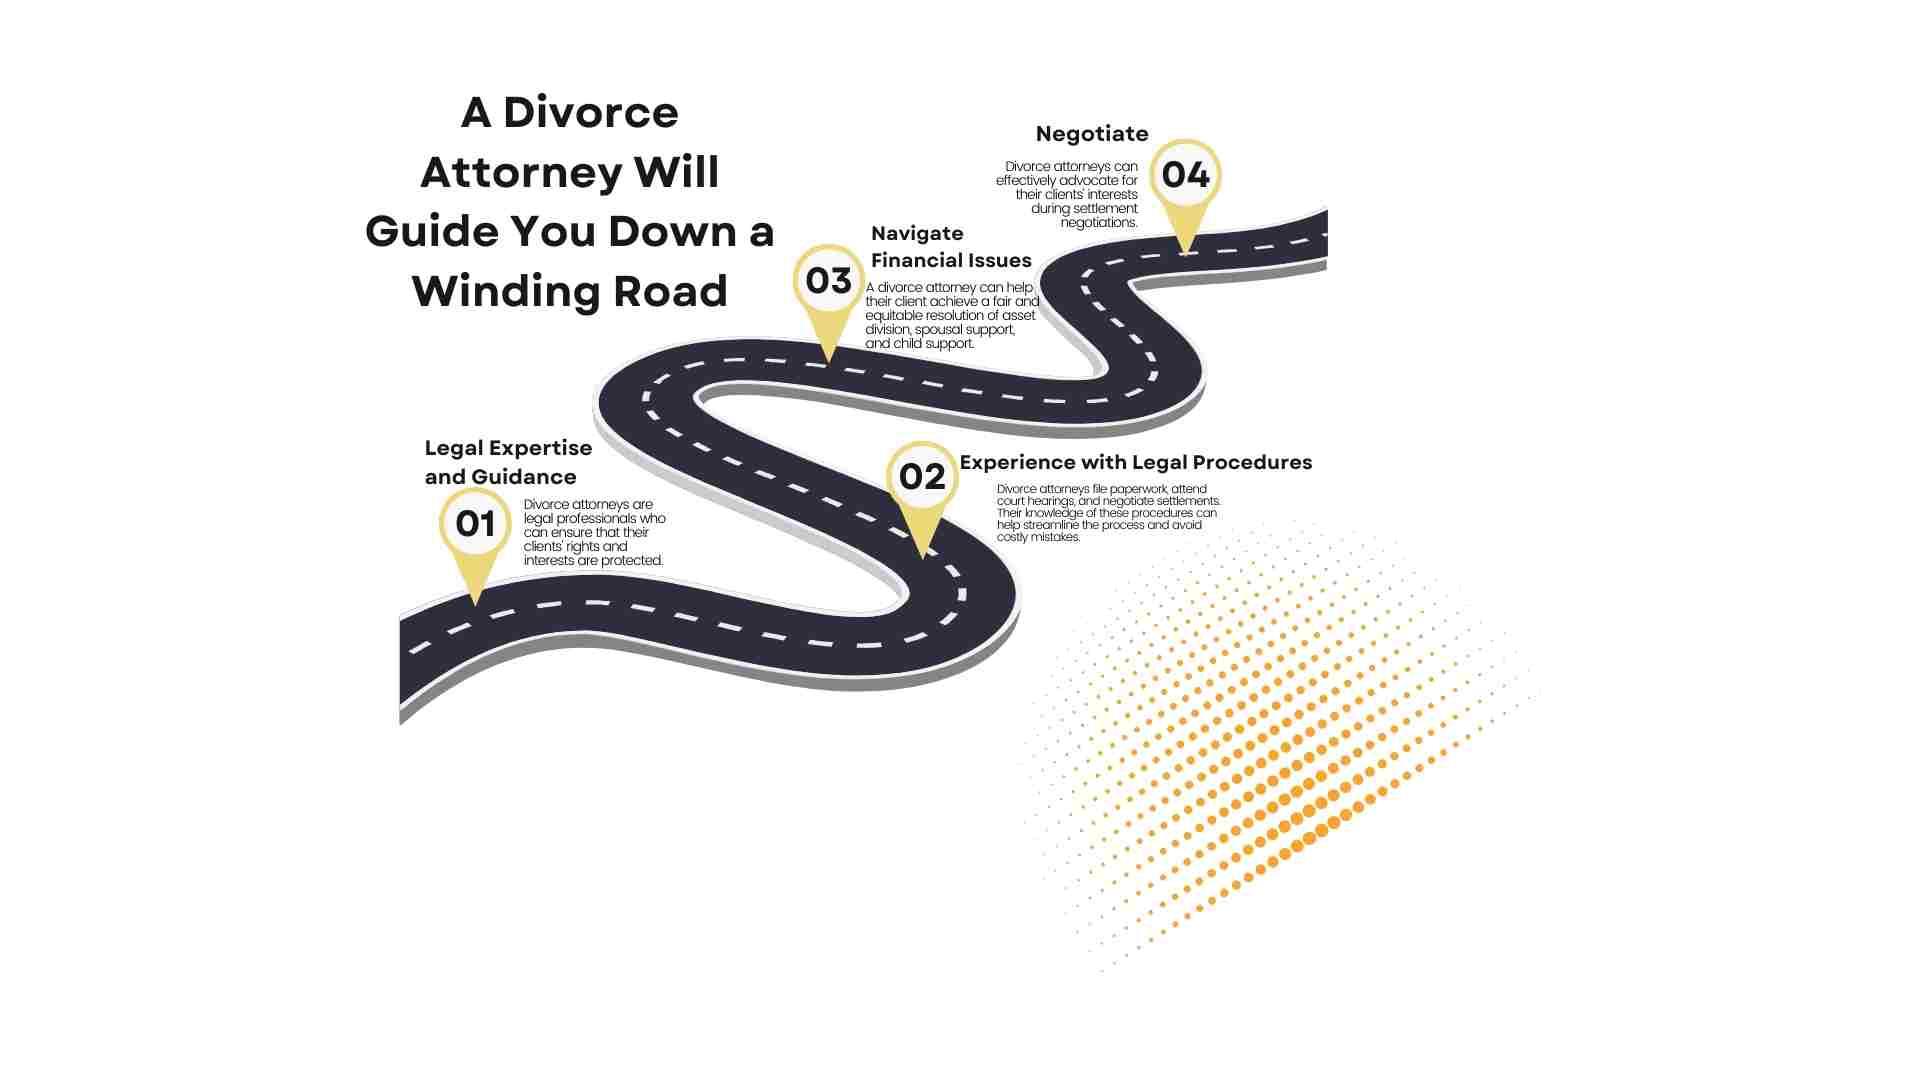 A road with a divorce lawyer.